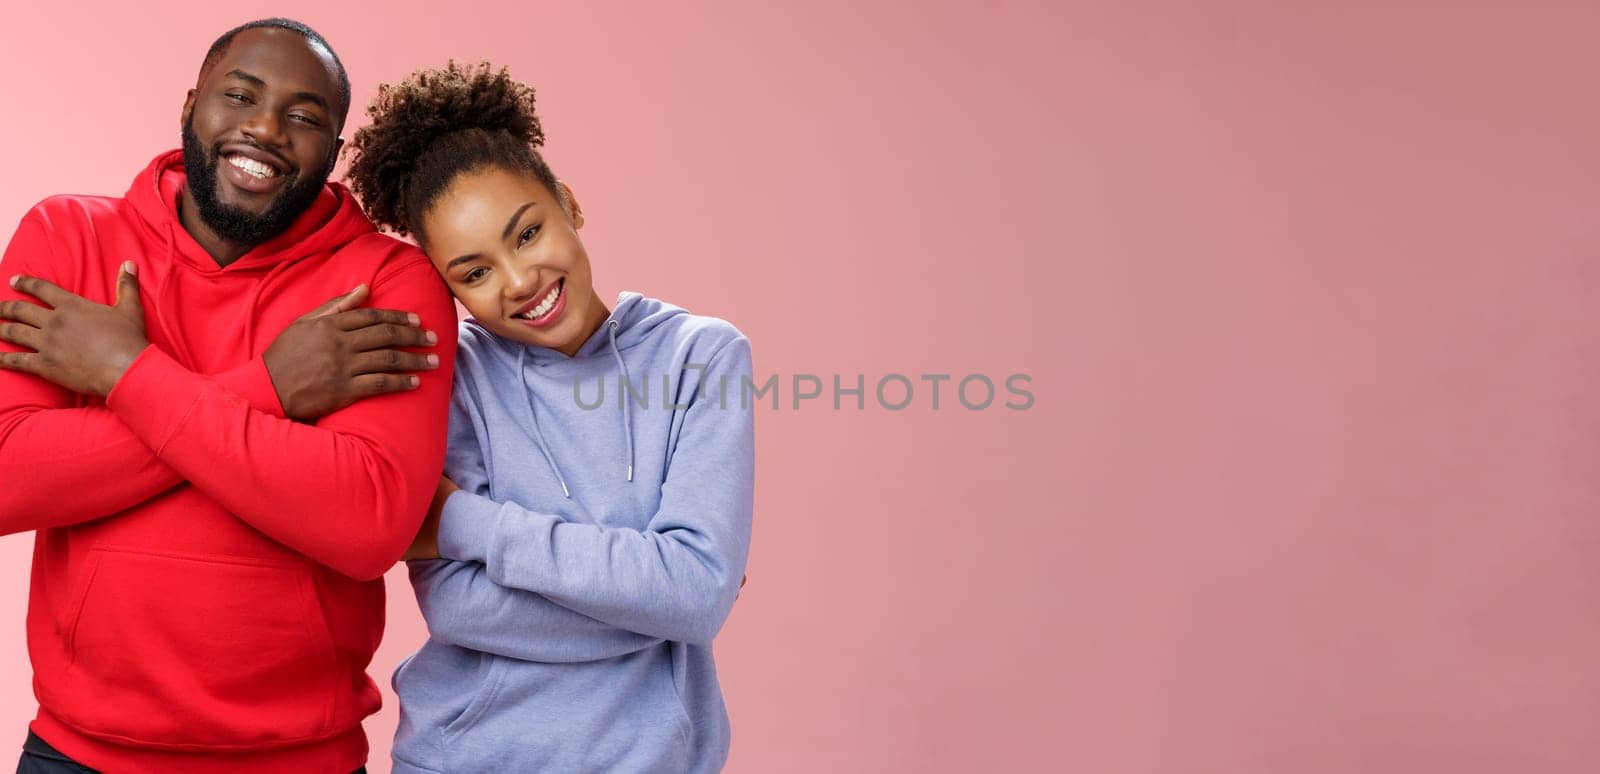 Lifestyle. Charming happy sincere african-american family guy girl relationship embracing cross arms chest hugging each other girlfriend lean boyfriend shoulder lovely couply smiling feel love warmth.